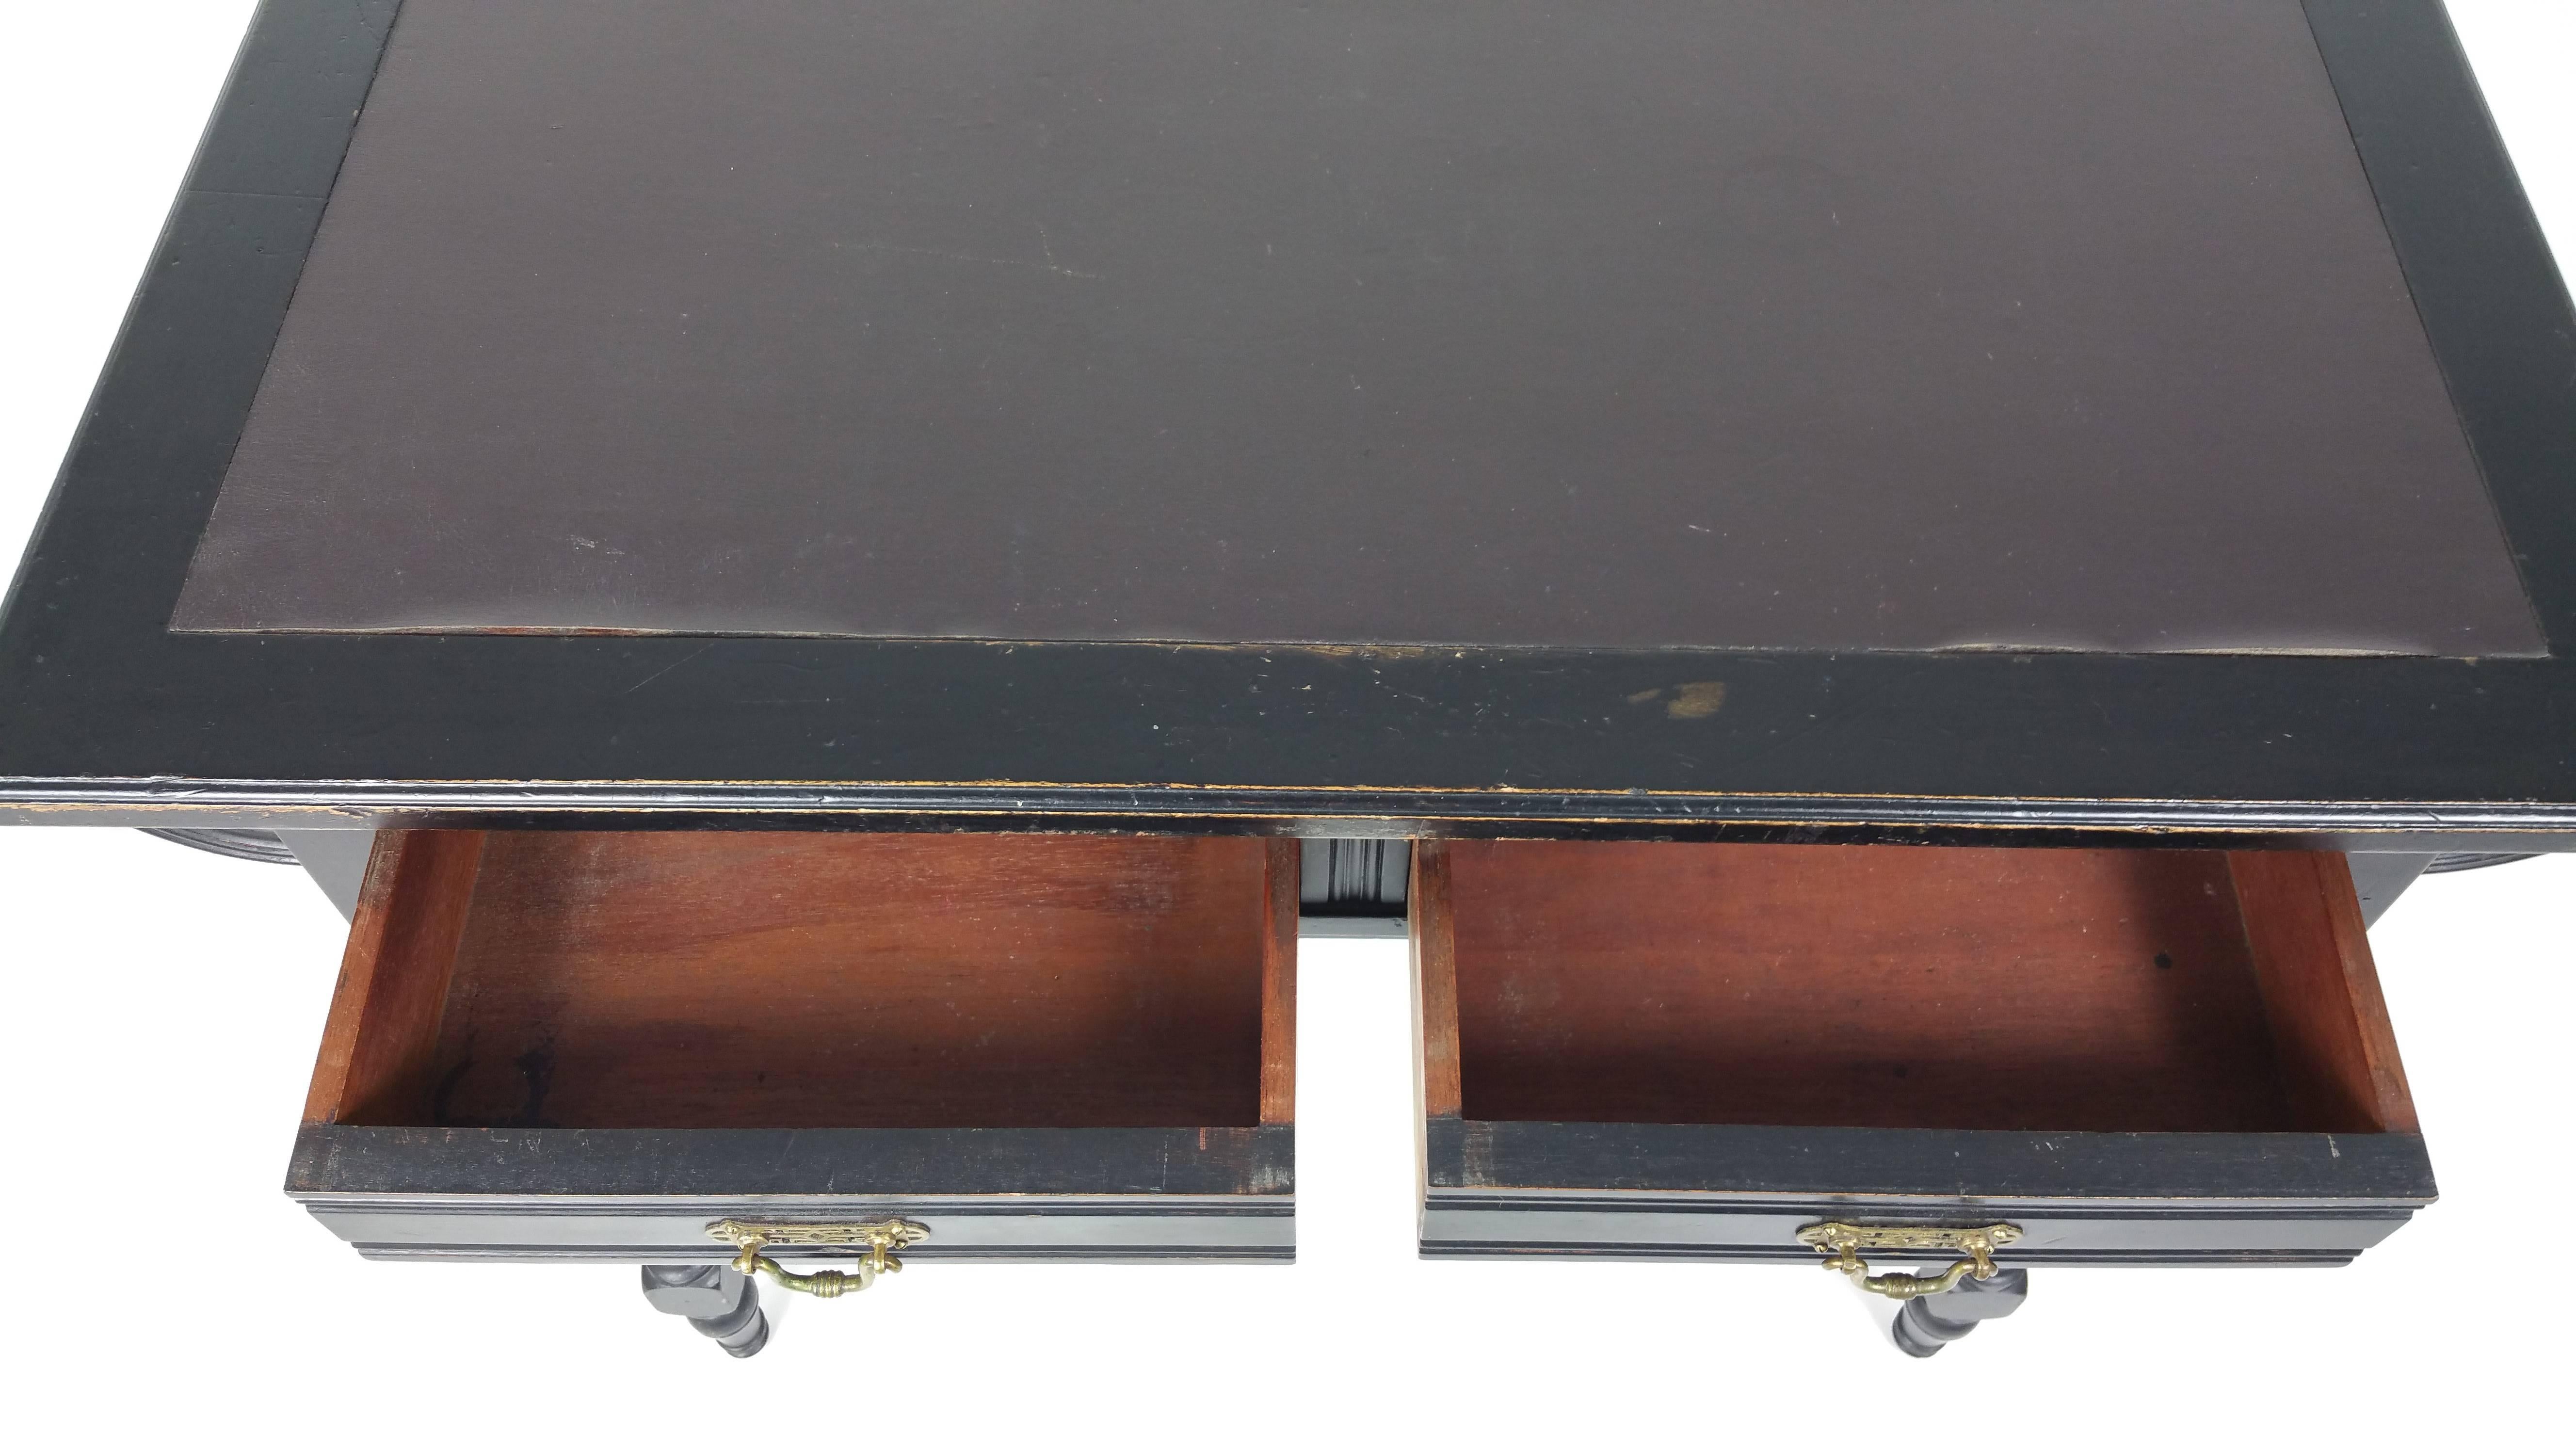 19th Century Art & Crafts Aesthetic Movement Ebonized Mahogany Writing Table In Excellent Condition In London, west Sussex